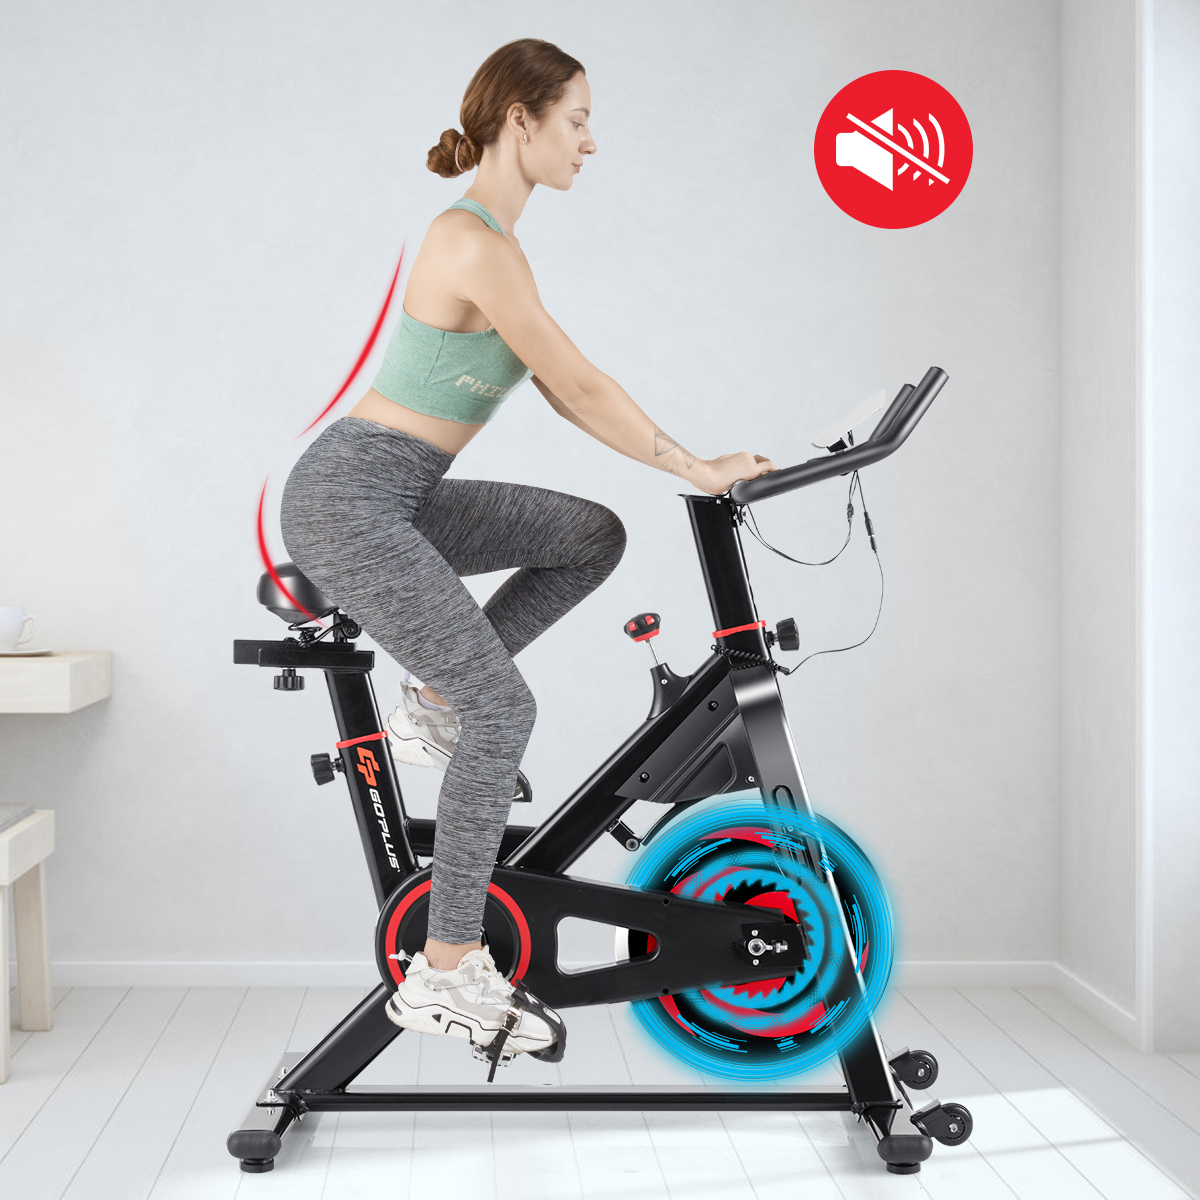 Stationary Exercise Magnetic Cycling Bike 30Lbs Flywheel Home Gym Cardio Workout - image 3 of 10